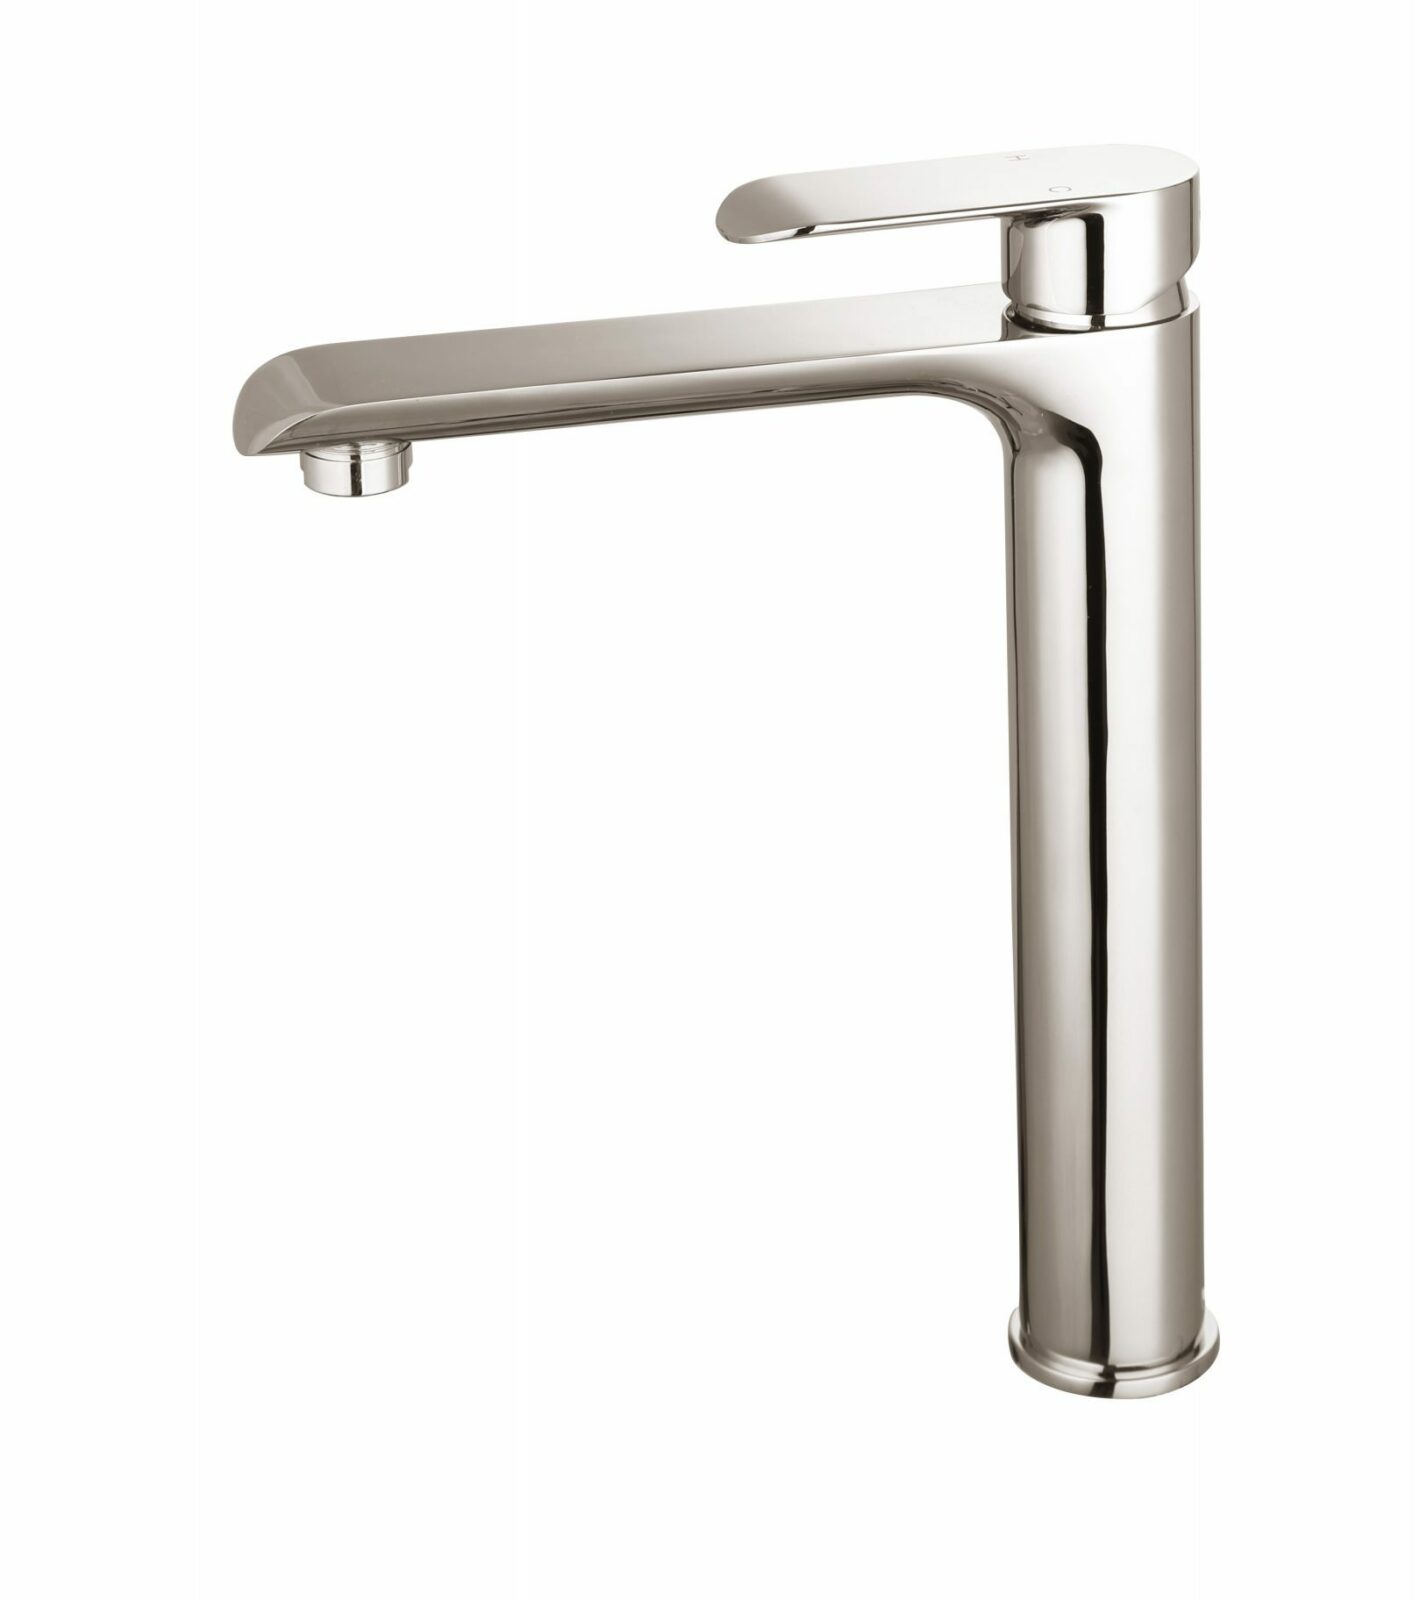 OVAL Brushed Nickel Tall Basin Mixer